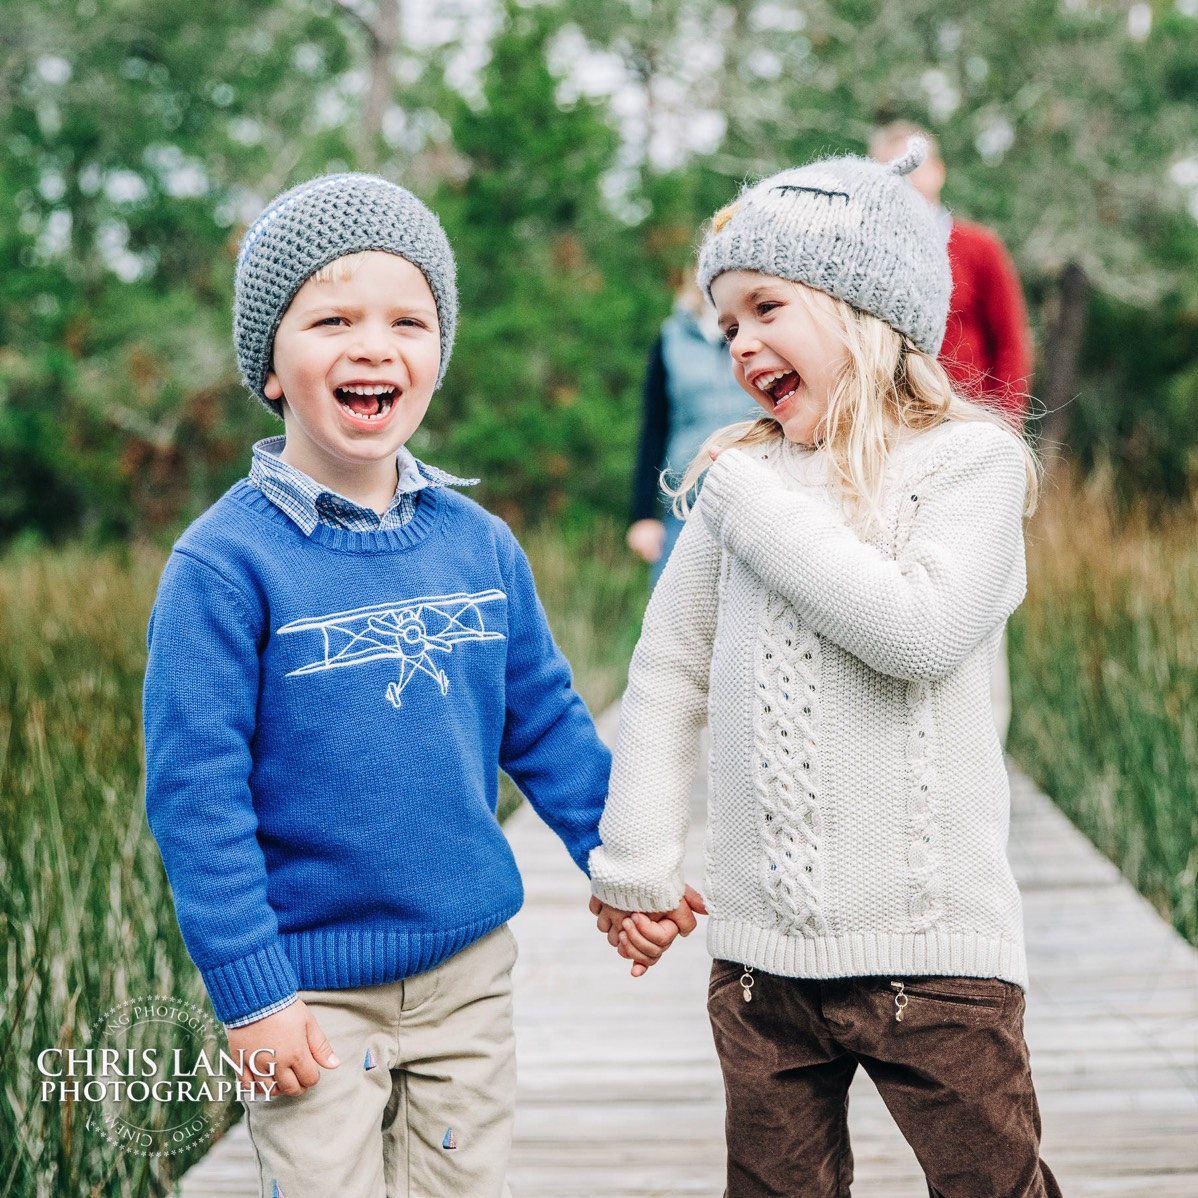 brother and sister holding hands and laughing - Places for family vacation - Bald Head Island Photographers - BHI Photography - Kids Portraits -  Pictures on Bald Head Island - BHI Photo Services - Chris Lang Photography 